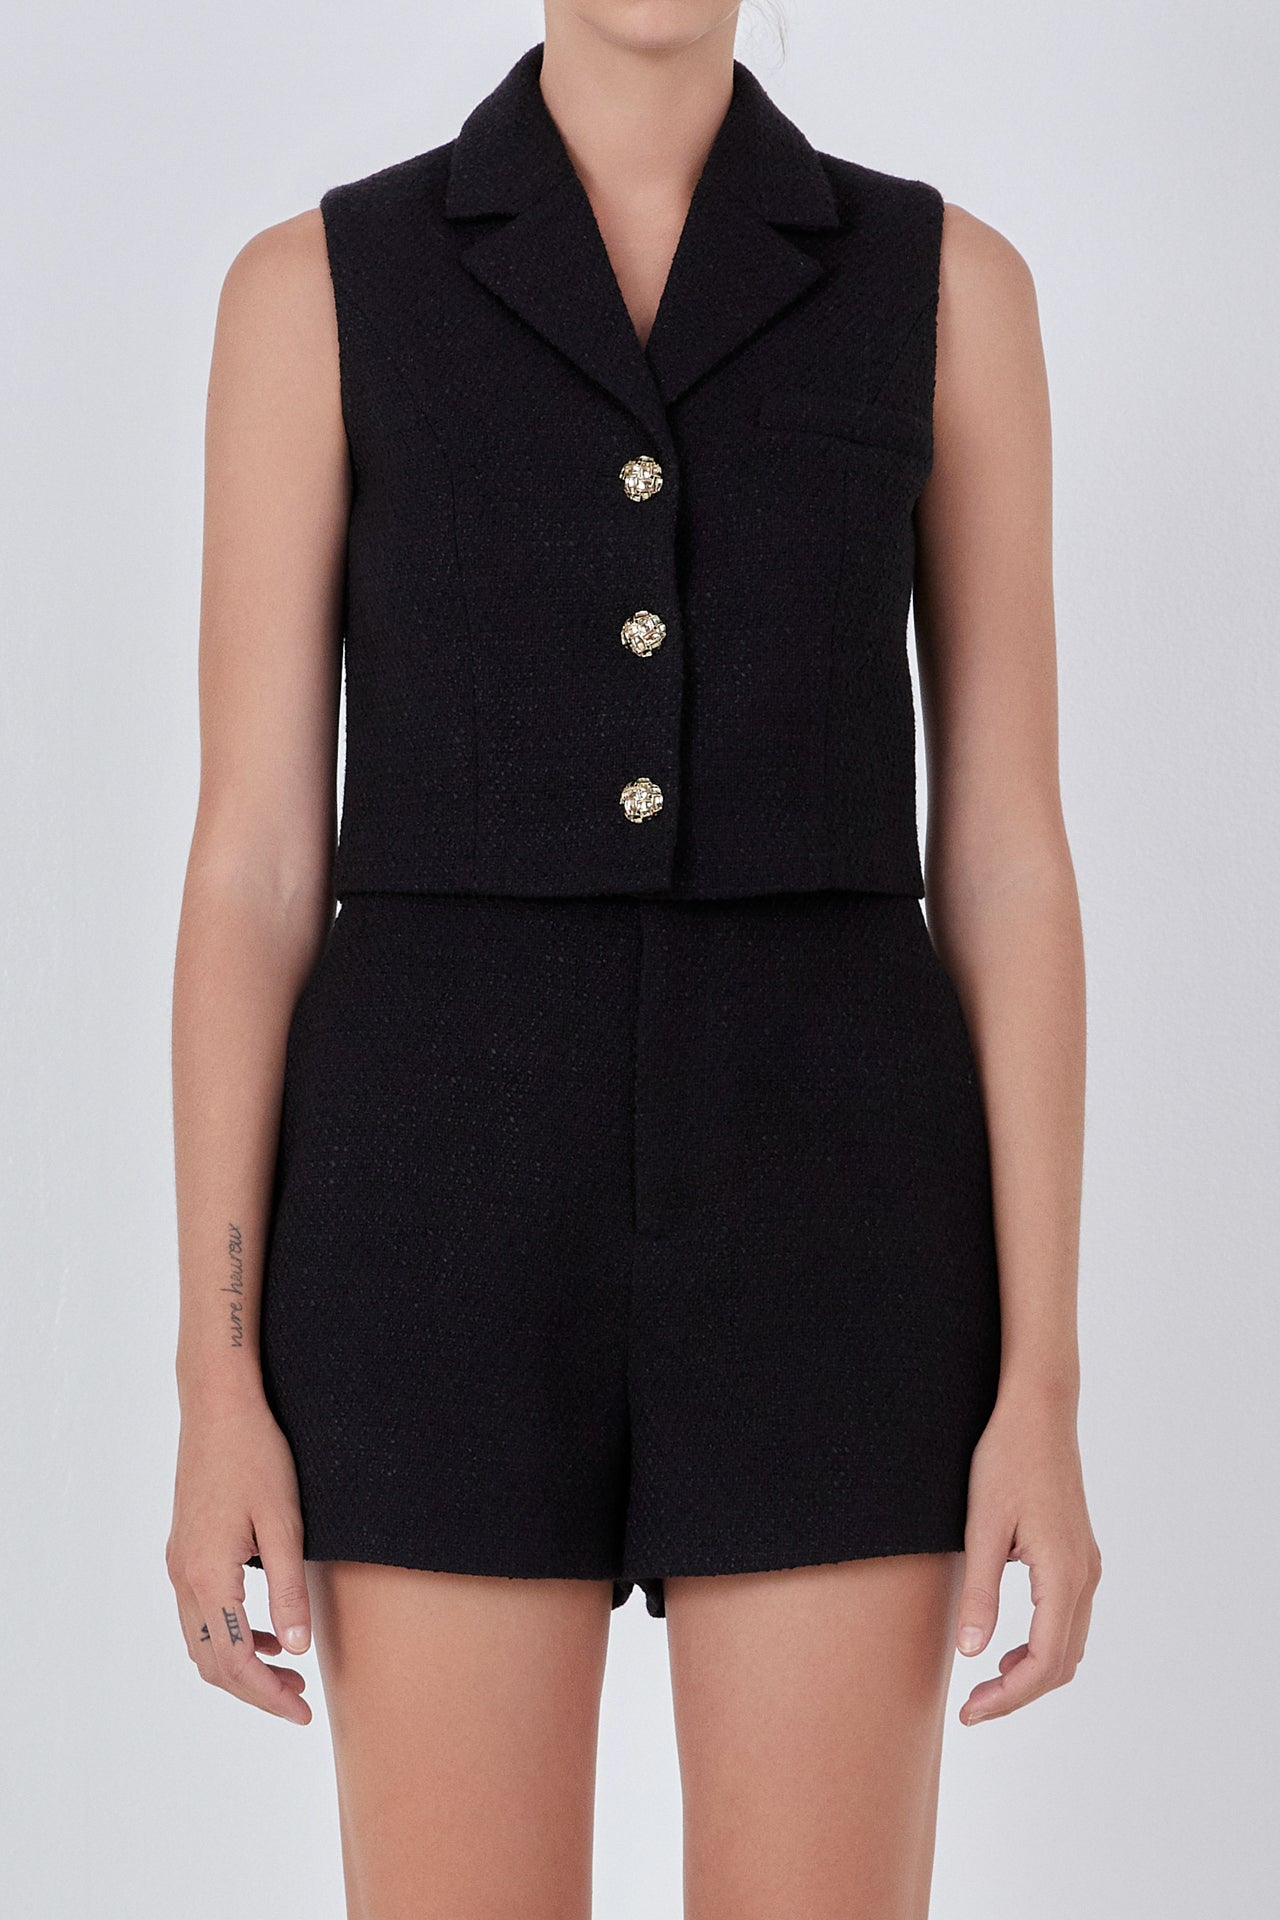 ENDLESS ROSE - Tweed Collared Vest - TOPS available at Objectrare